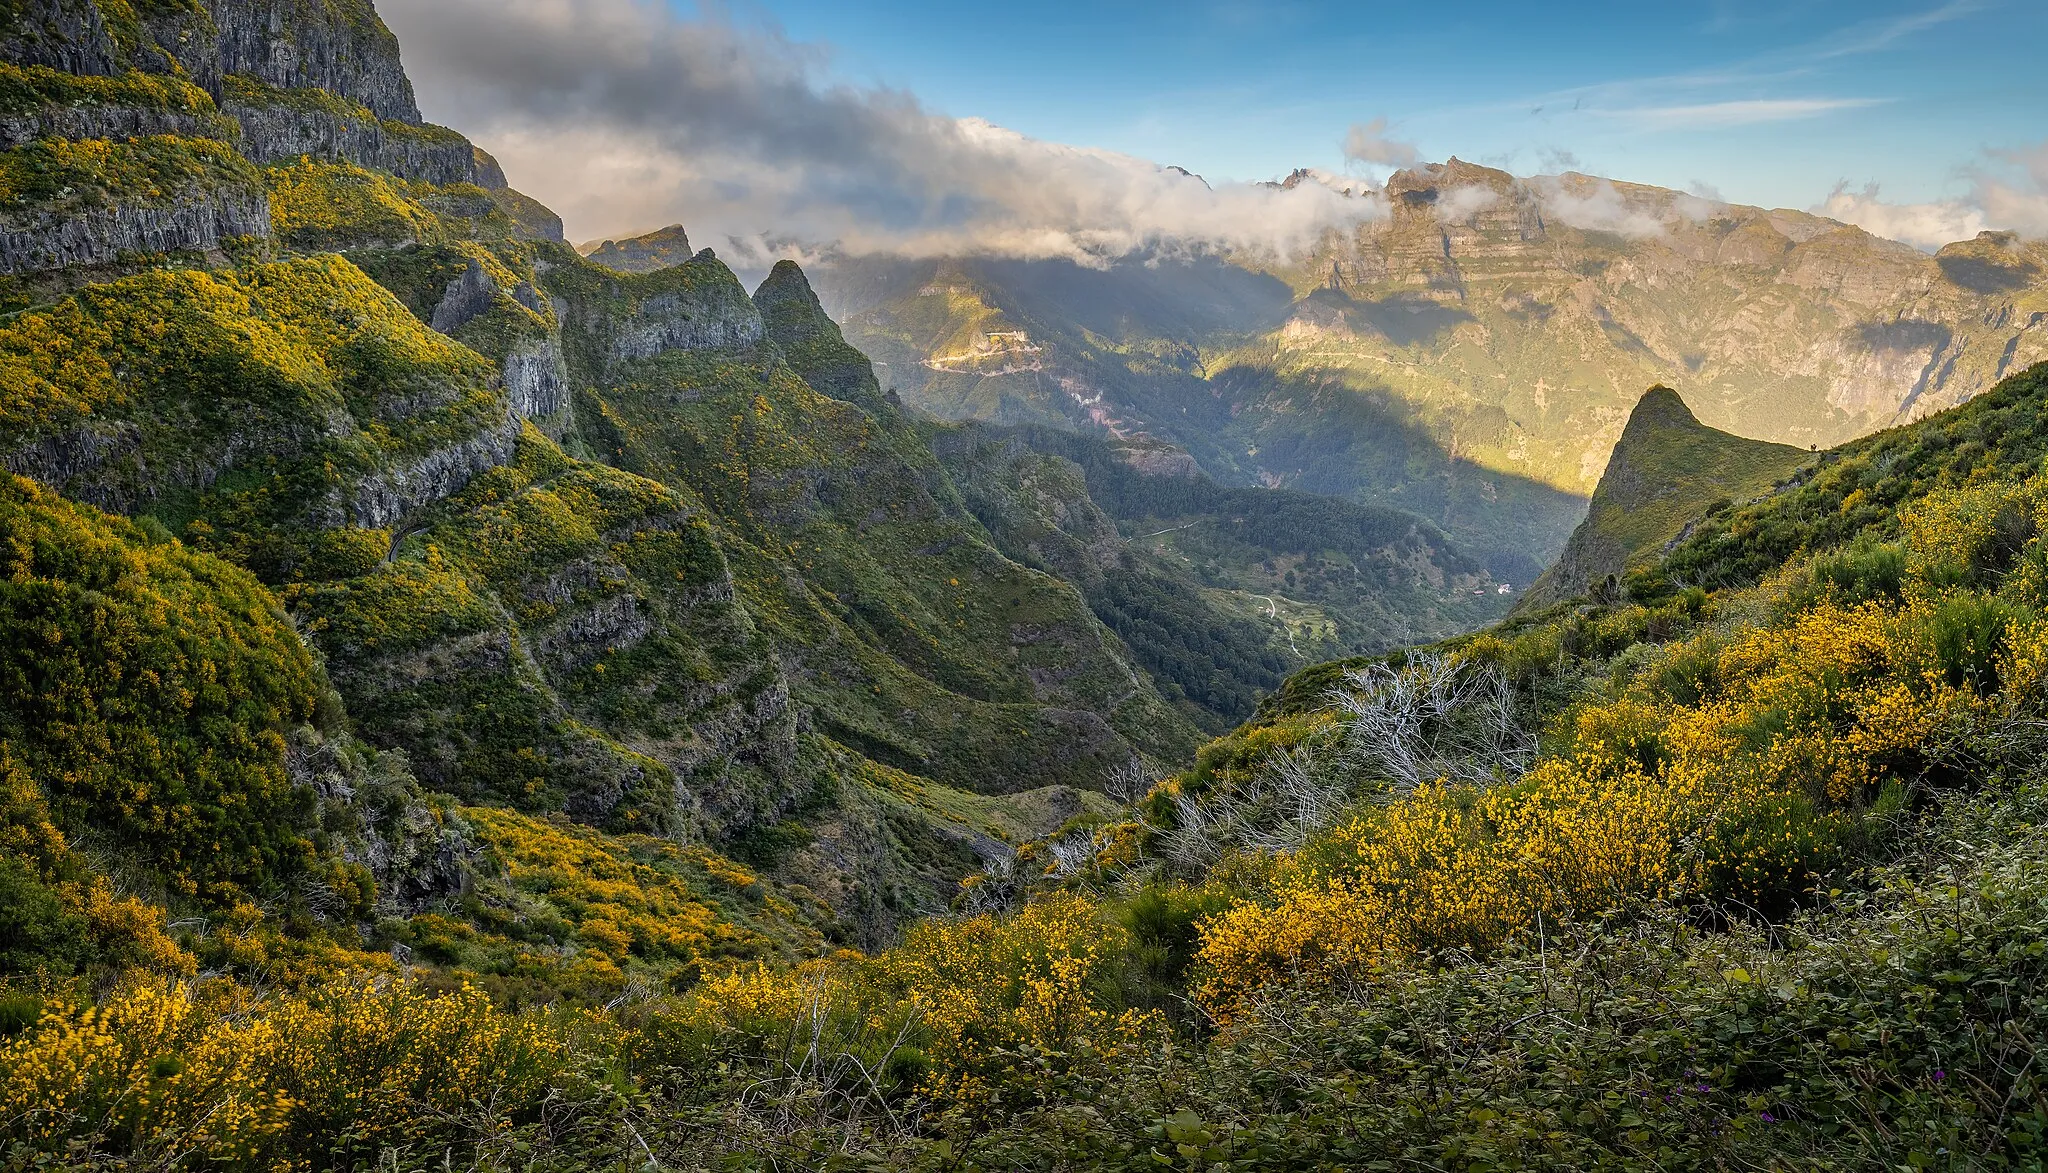 Photo showing: An evening view down the valley of Fajã das Éguas in Tabua, Ribeira Brava, Madeira, Portugal in 2023 May. The road, where the view is from, is Estrada Regional 105 that weaves on the steep side of the mountains which are the border of Ribeira Brava and Ponta do Sol. The yellow flowers belong to Genista tenera plant.